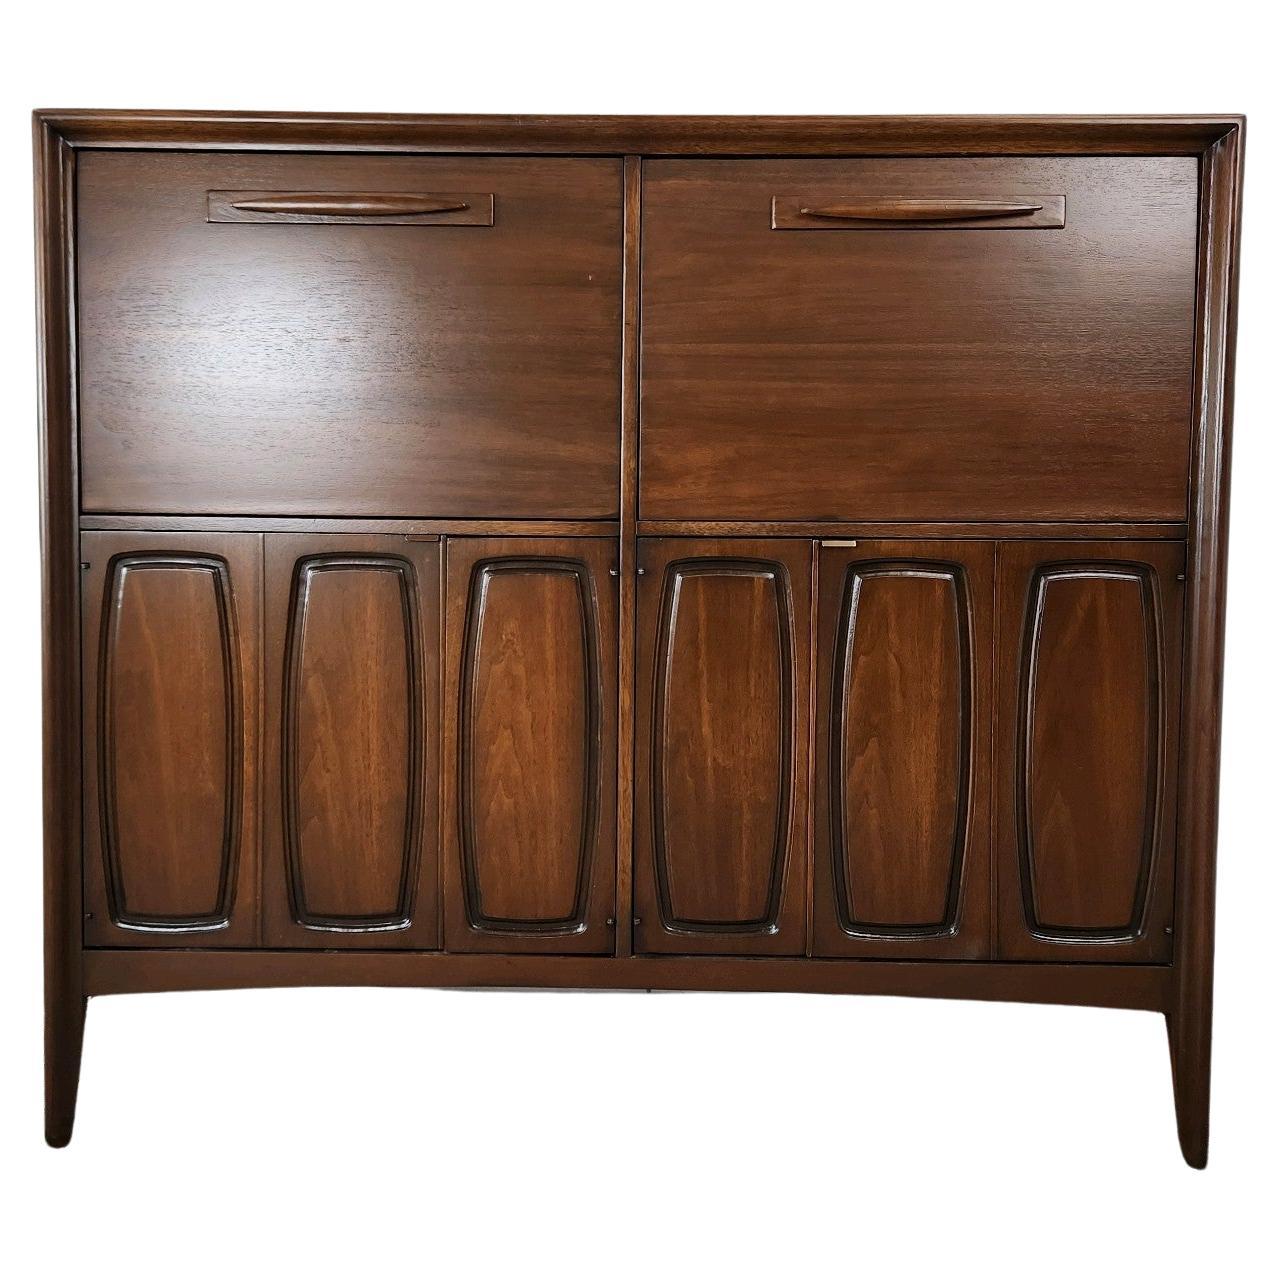 Broyhill Emphasis Double Bar Cabinet Butlers Pantry Mid-Century Modern 